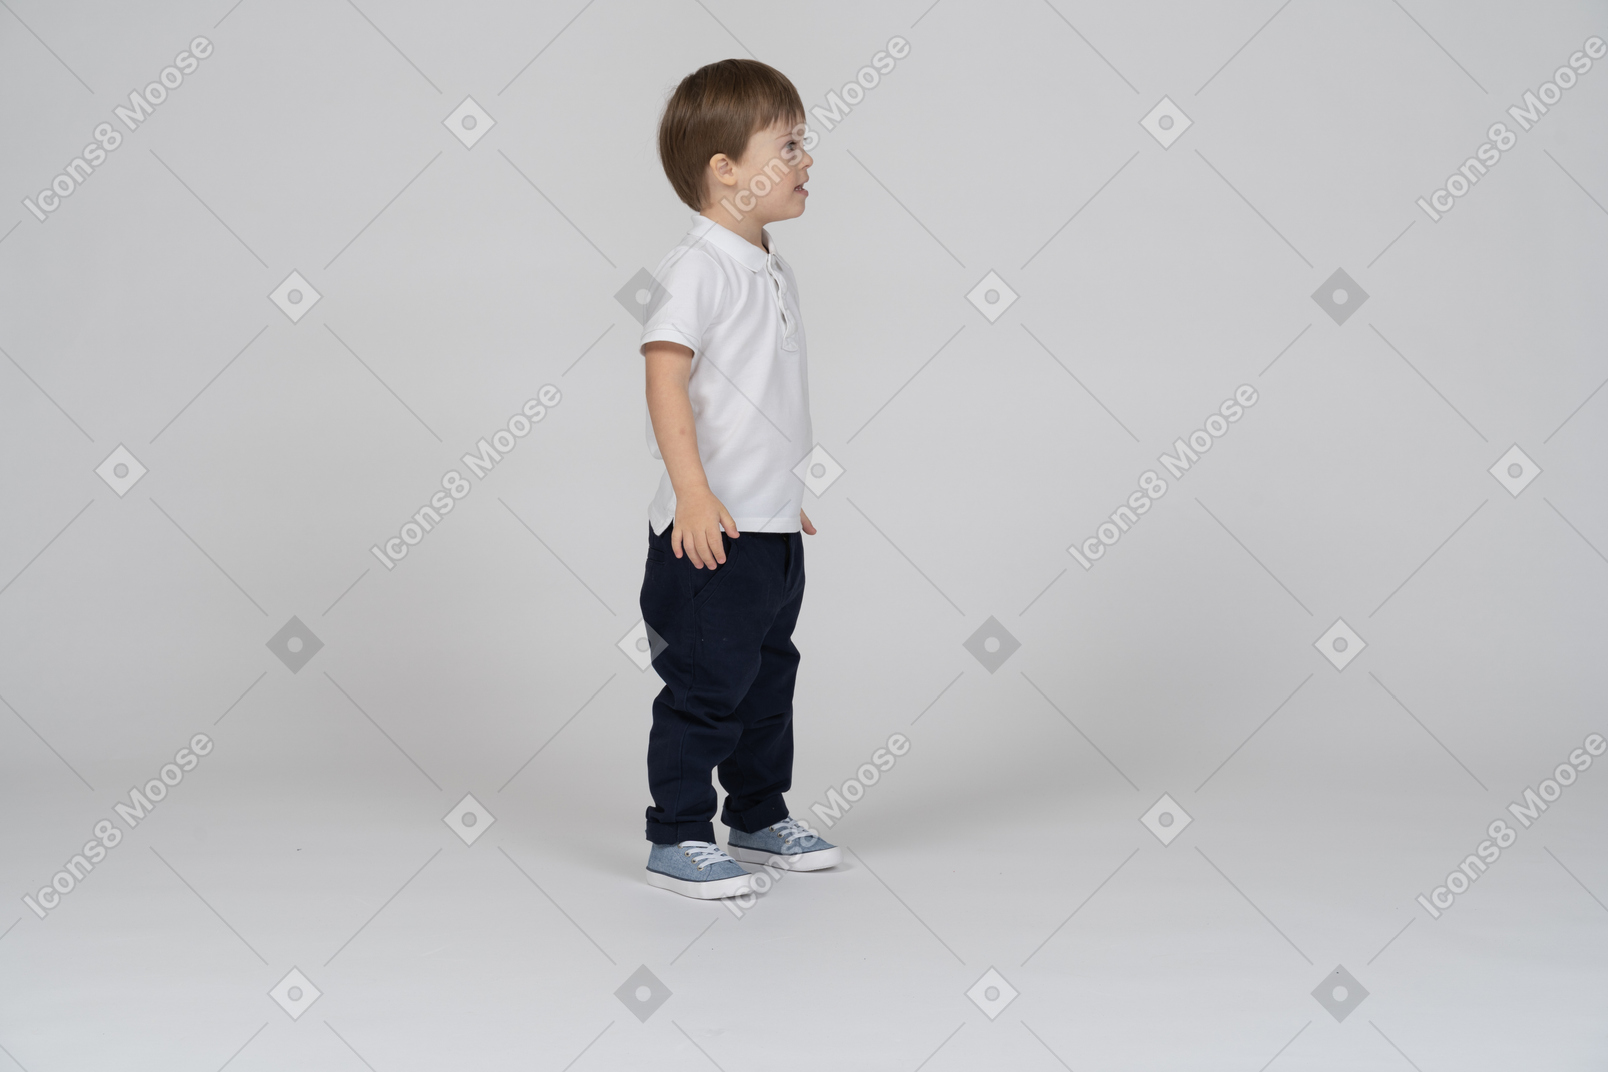 Side view of a little boy standing with arms at side